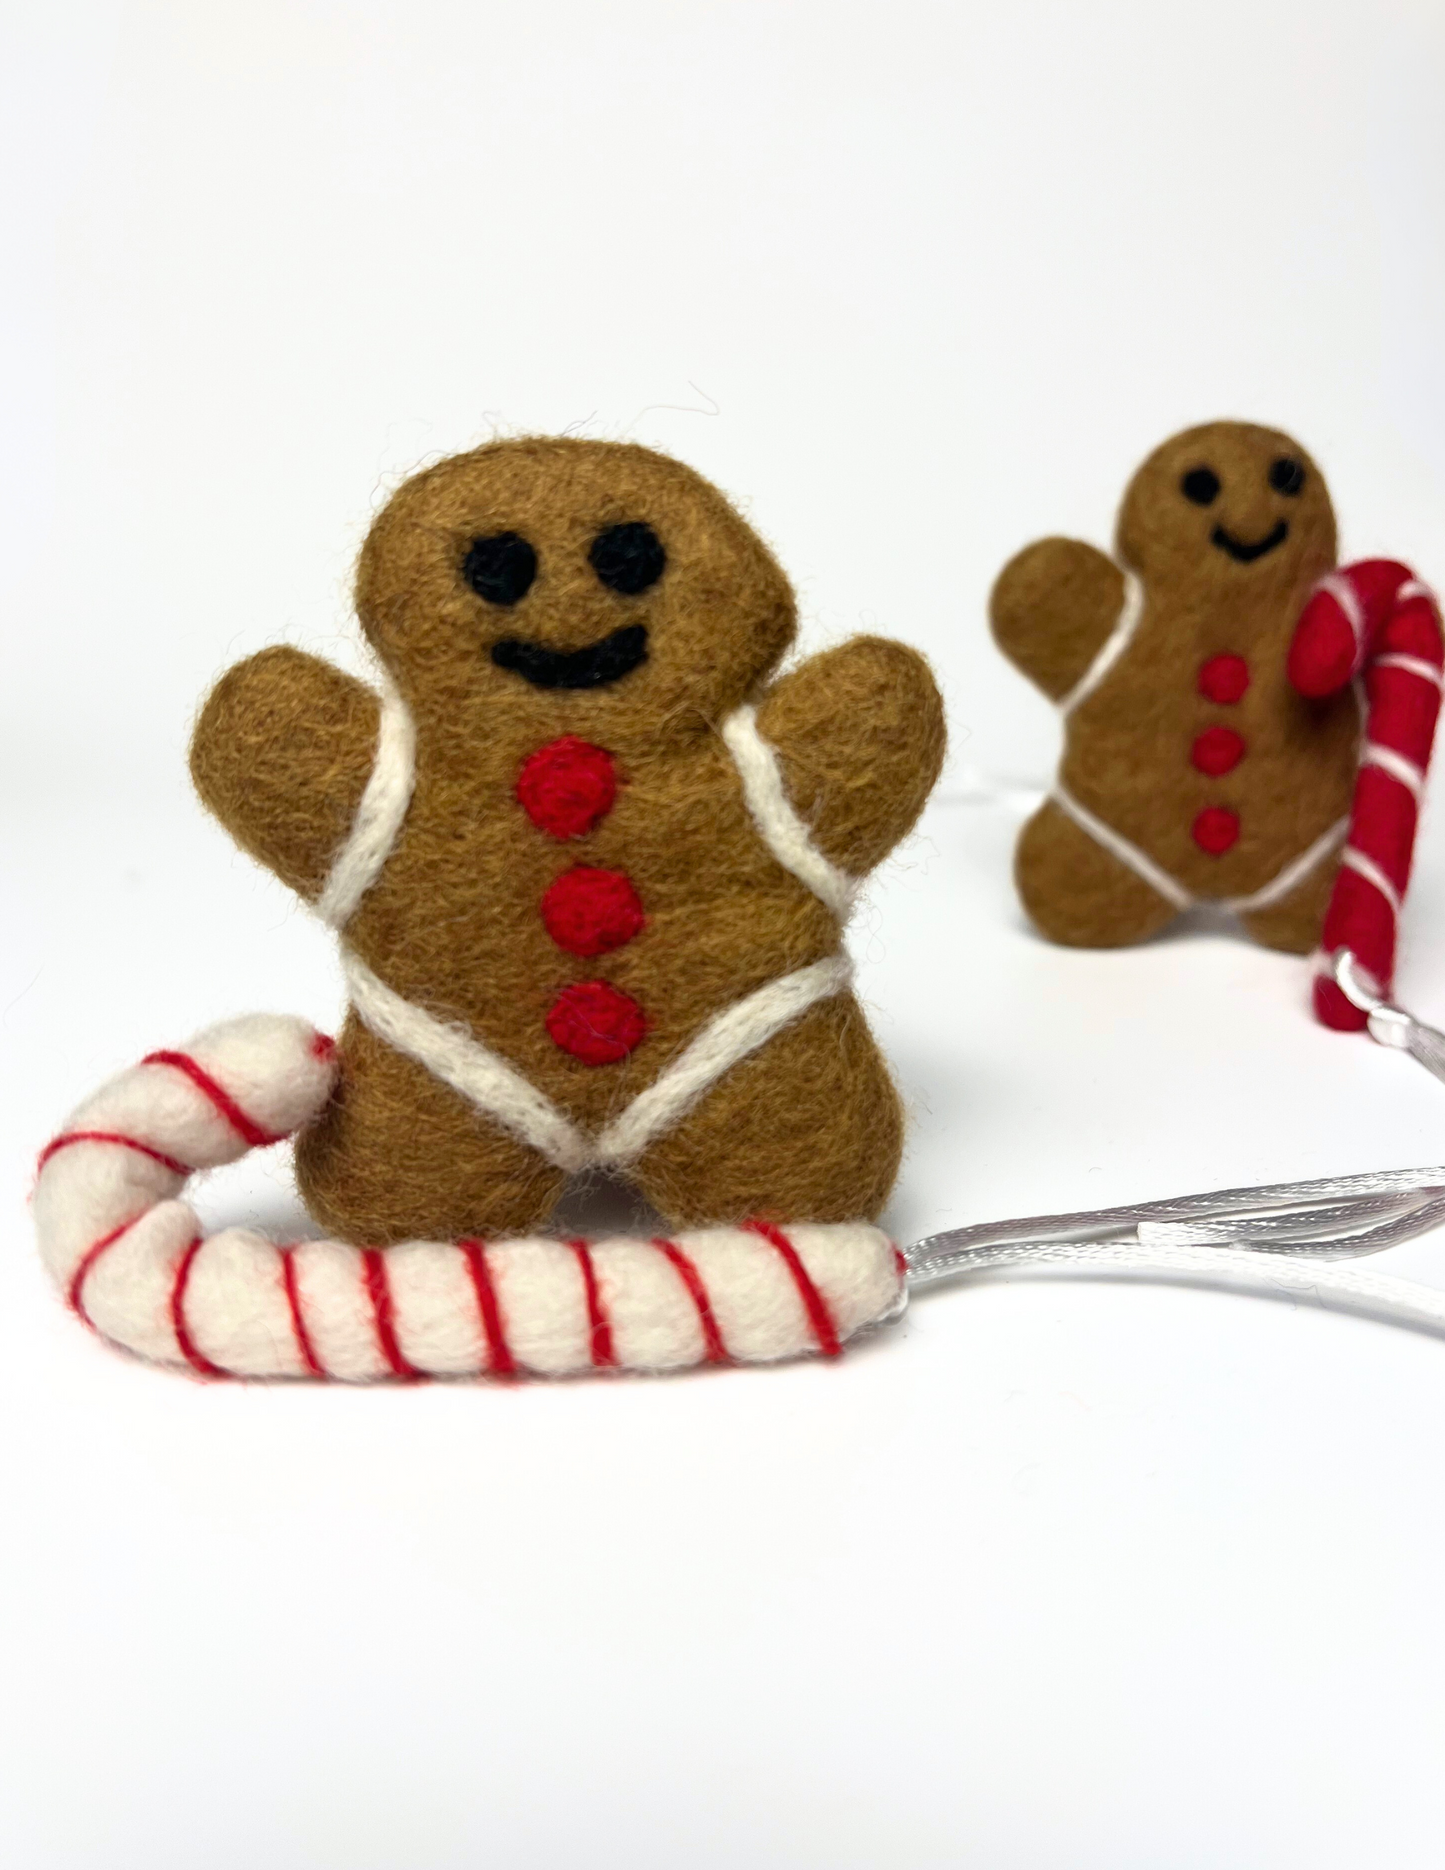 Gingerbread man and candy cane wool catnip toy